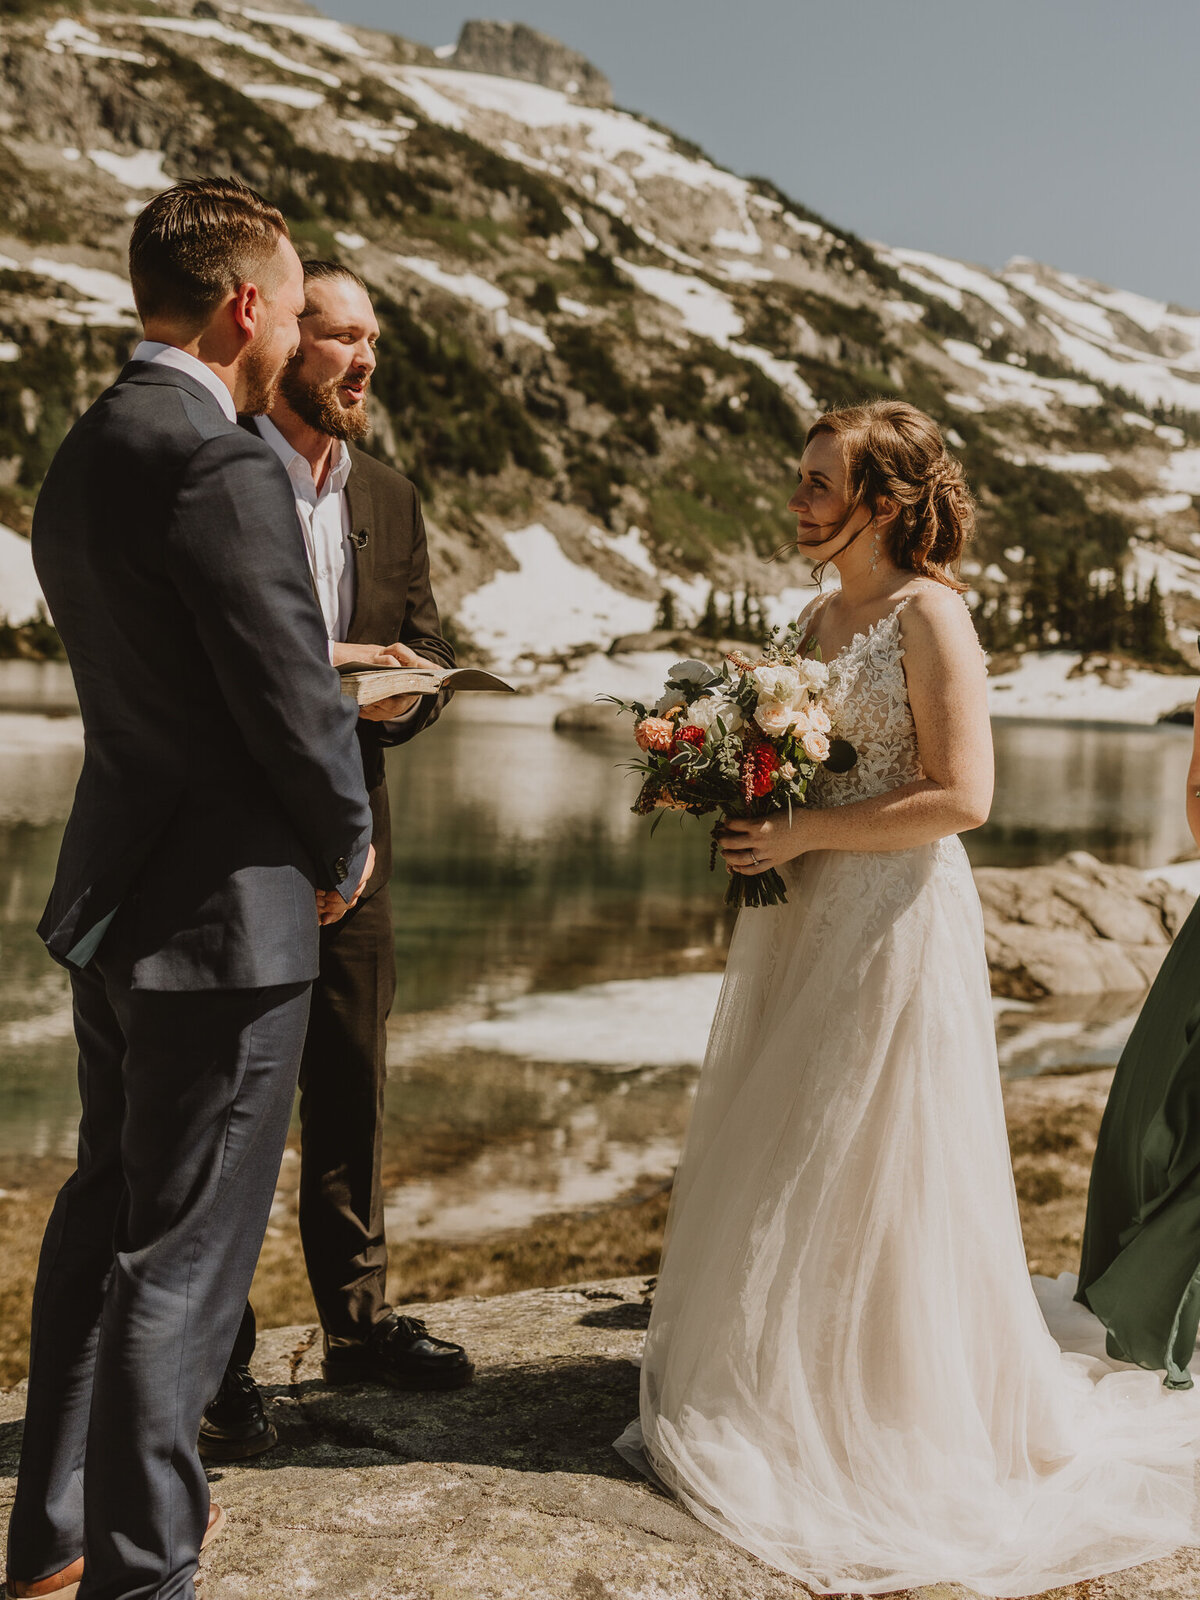 Couple getting married on a mountain